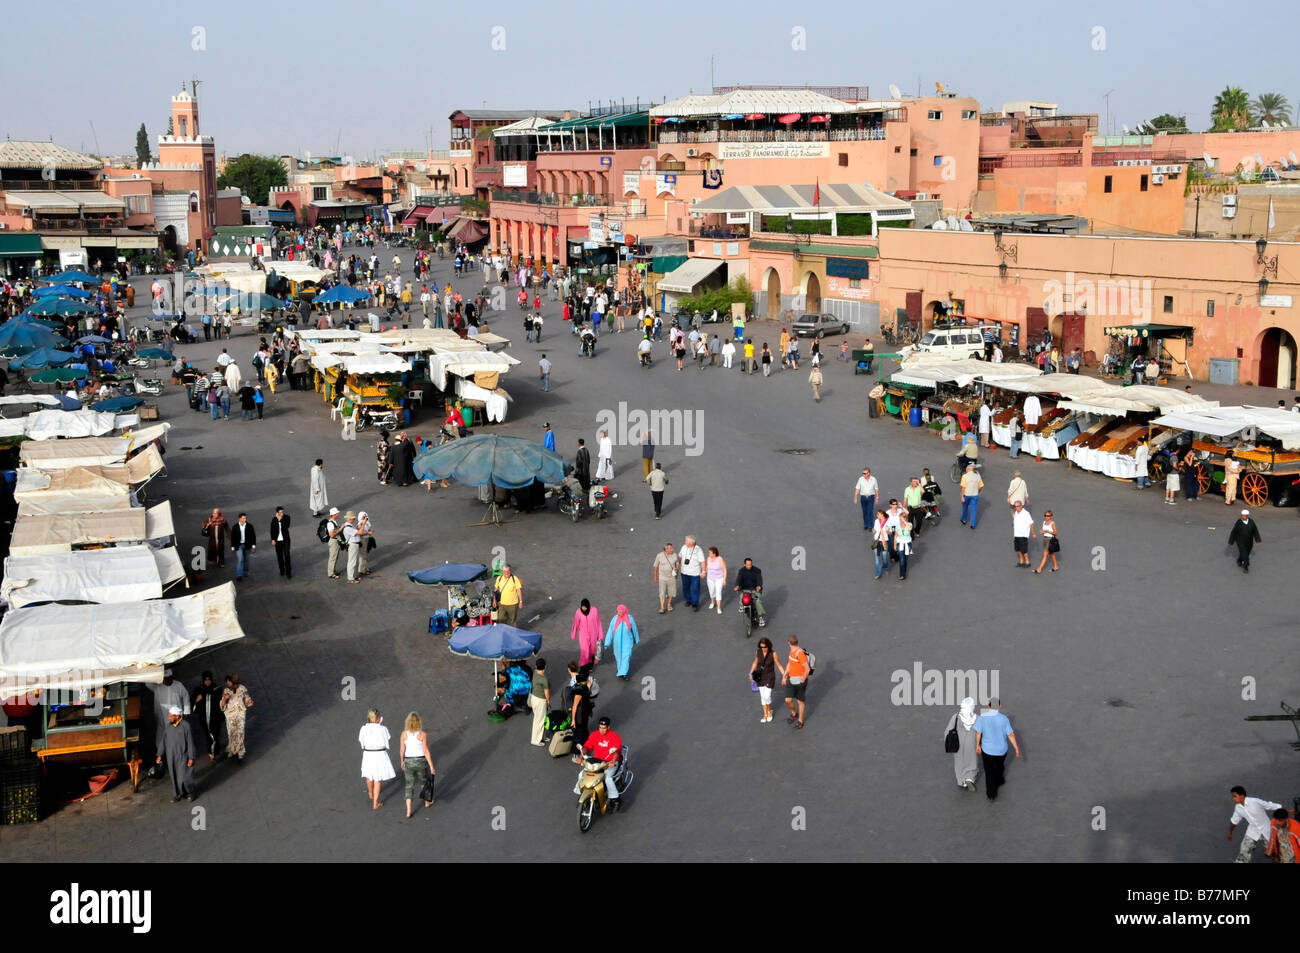 View from the terrace of the Café Glacier in the Place Djemma el-Fna, Square of the hanged, imposter square, Marrakech, Morocco Stock Photo